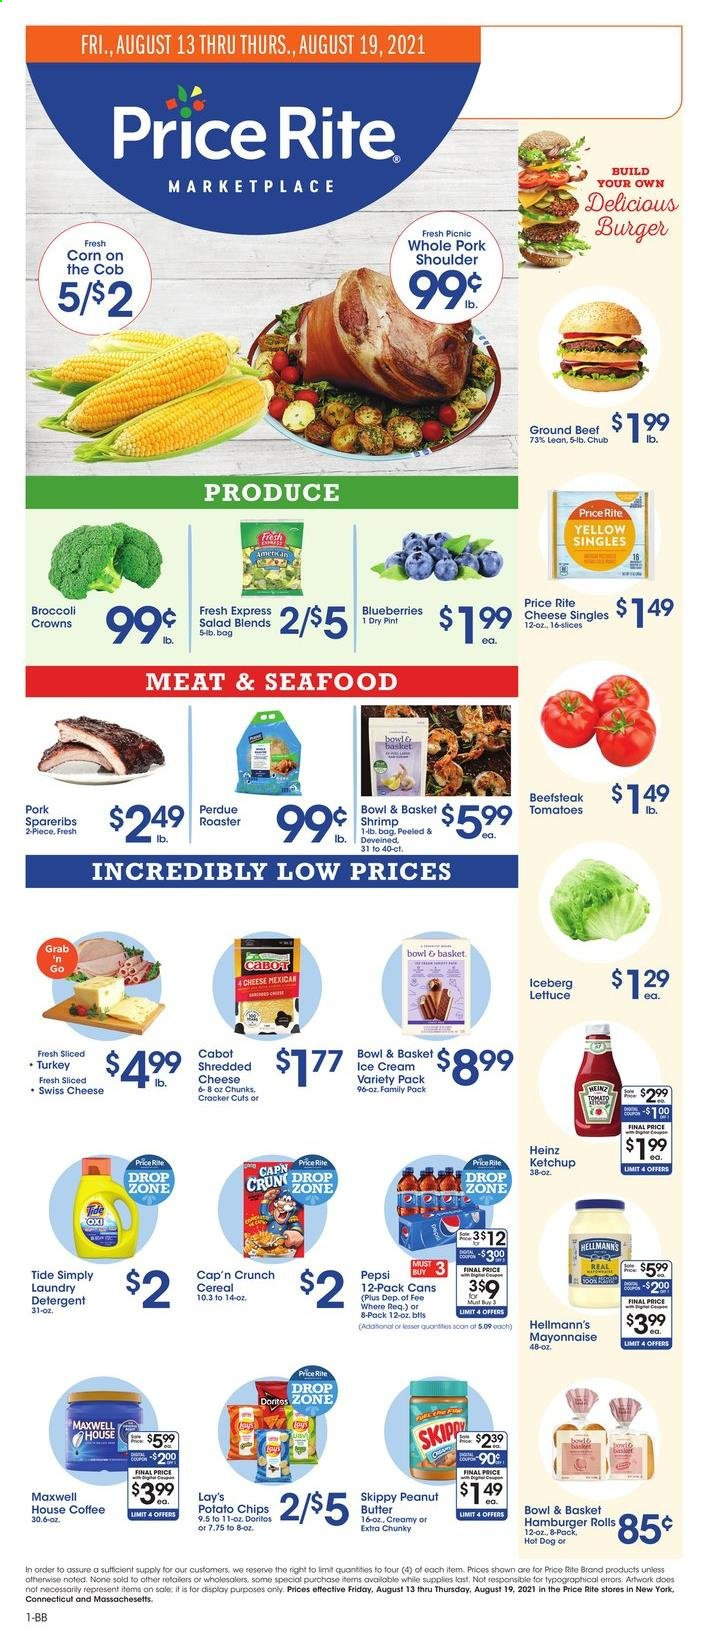 thumbnail - Price Rite Flyer - 08/13/2021 - 08/19/2021 - Sales products - burger buns, Bowl & Basket, broccoli, corn, lettuce, salad, blueberries, seafood, shrimps, hamburger, Perdue®, shredded cheese, swiss cheese, butter, mayonnaise, Hellmann’s, ice cream, crackers, Doritos, potato chips, chips, Lay’s, Heinz, cereals, Cap'n Crunch, ketchup, Pepsi, Maxwell House, coffee, beef meat, ground beef, pork meat, pork shoulder, pork spare ribs, detergent, Tide, laundry detergent. Page 1.